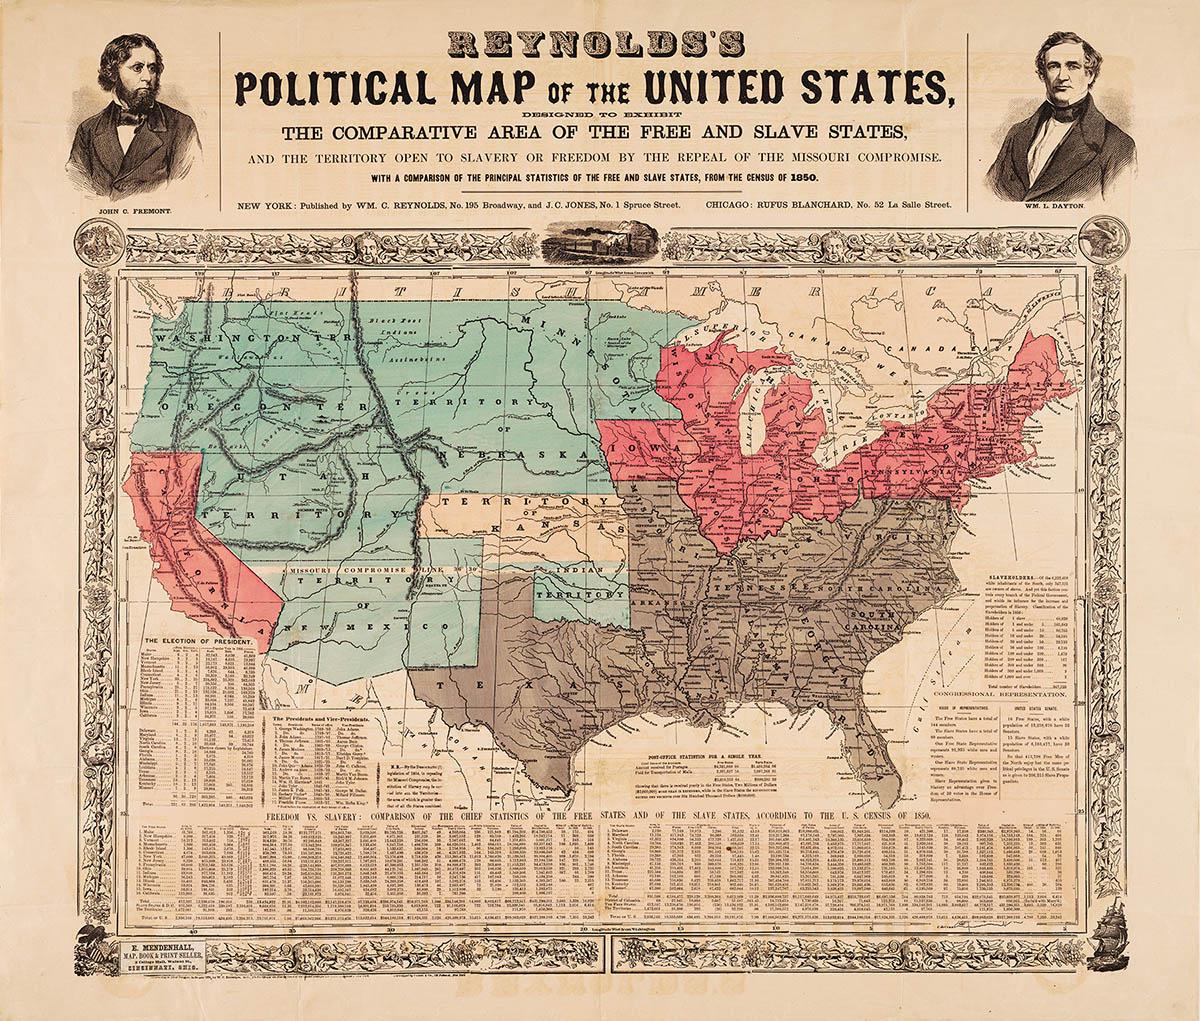 Reynolds's Political Map of the United States, 1856
